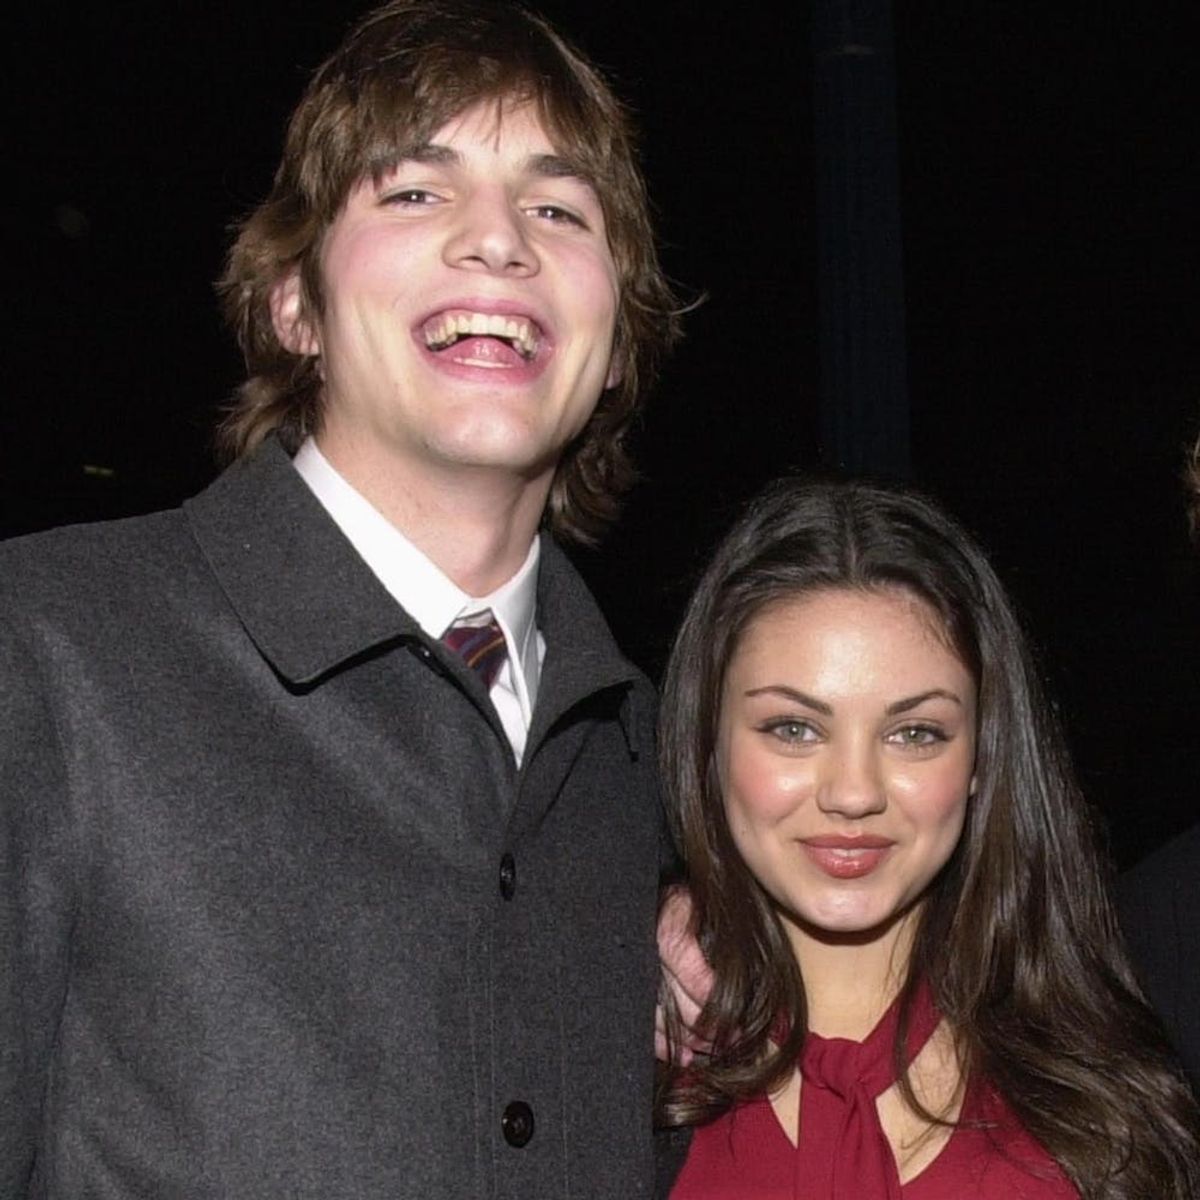 Ashton Kutcher and Mila Kunis Just Paid Tribute to Their “That ’70s Show” Characters in *the* Most Adorable Way